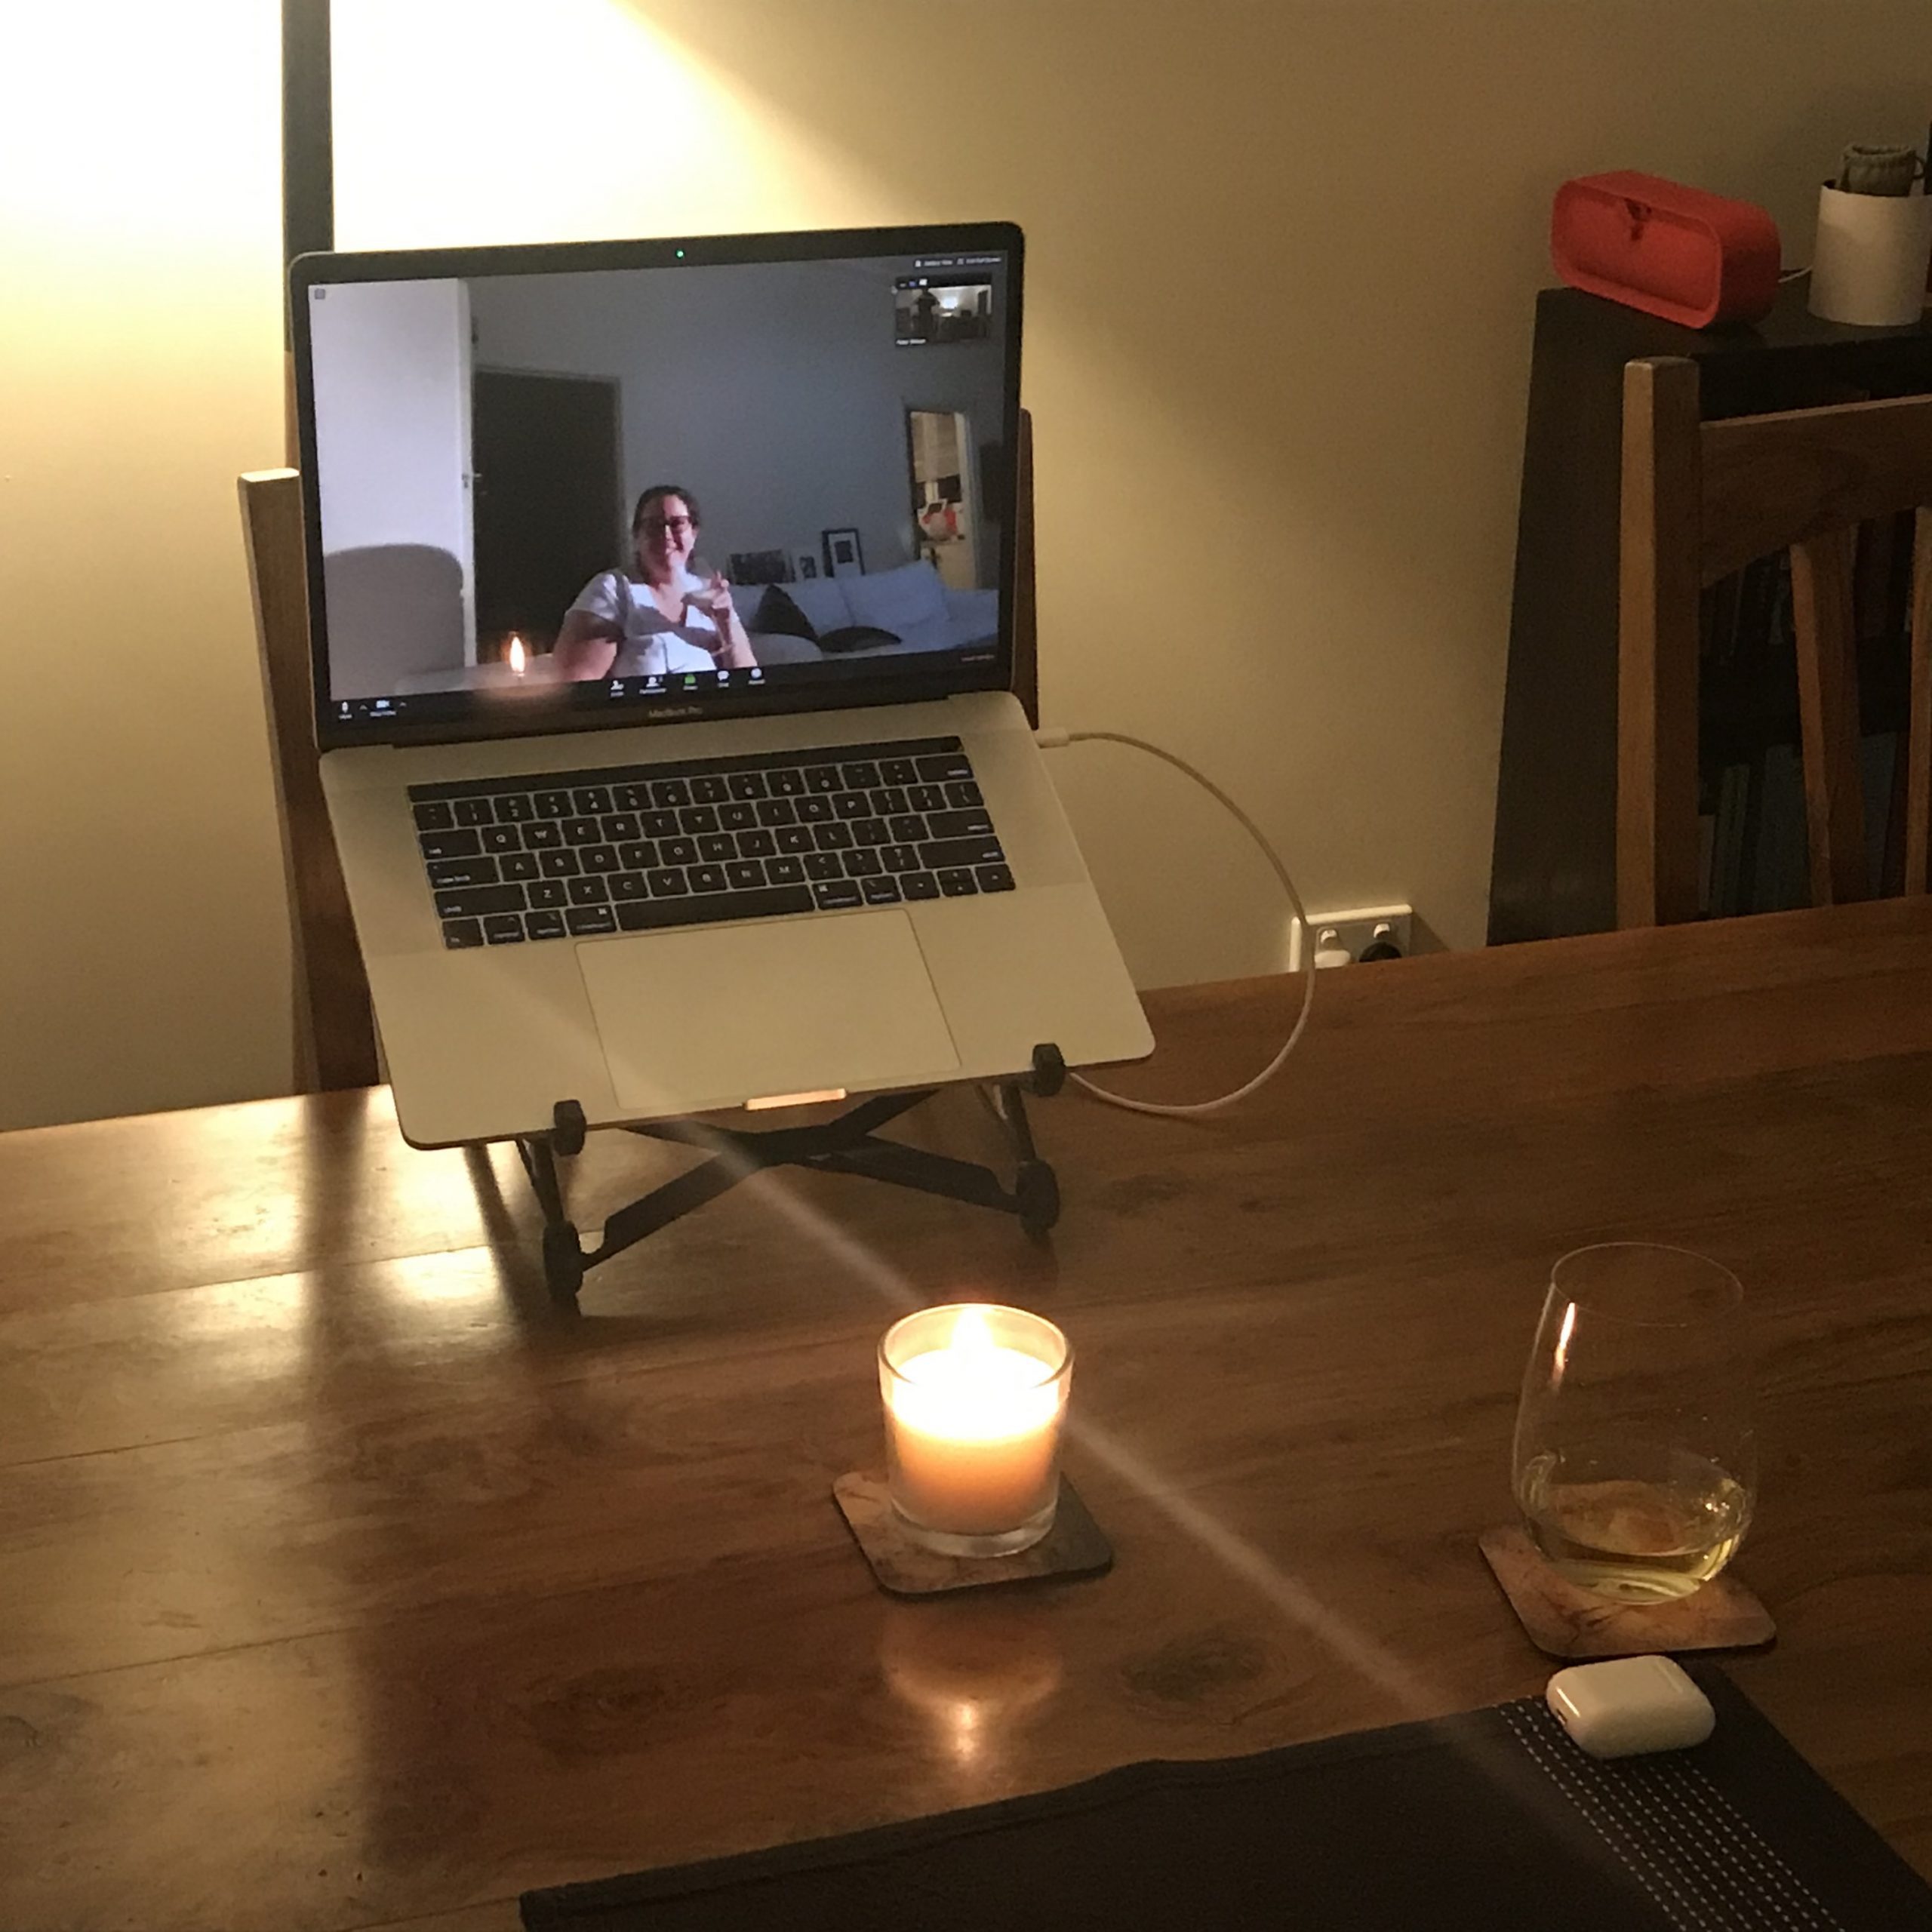 Dinner table set for one with laptop displaying a video call.